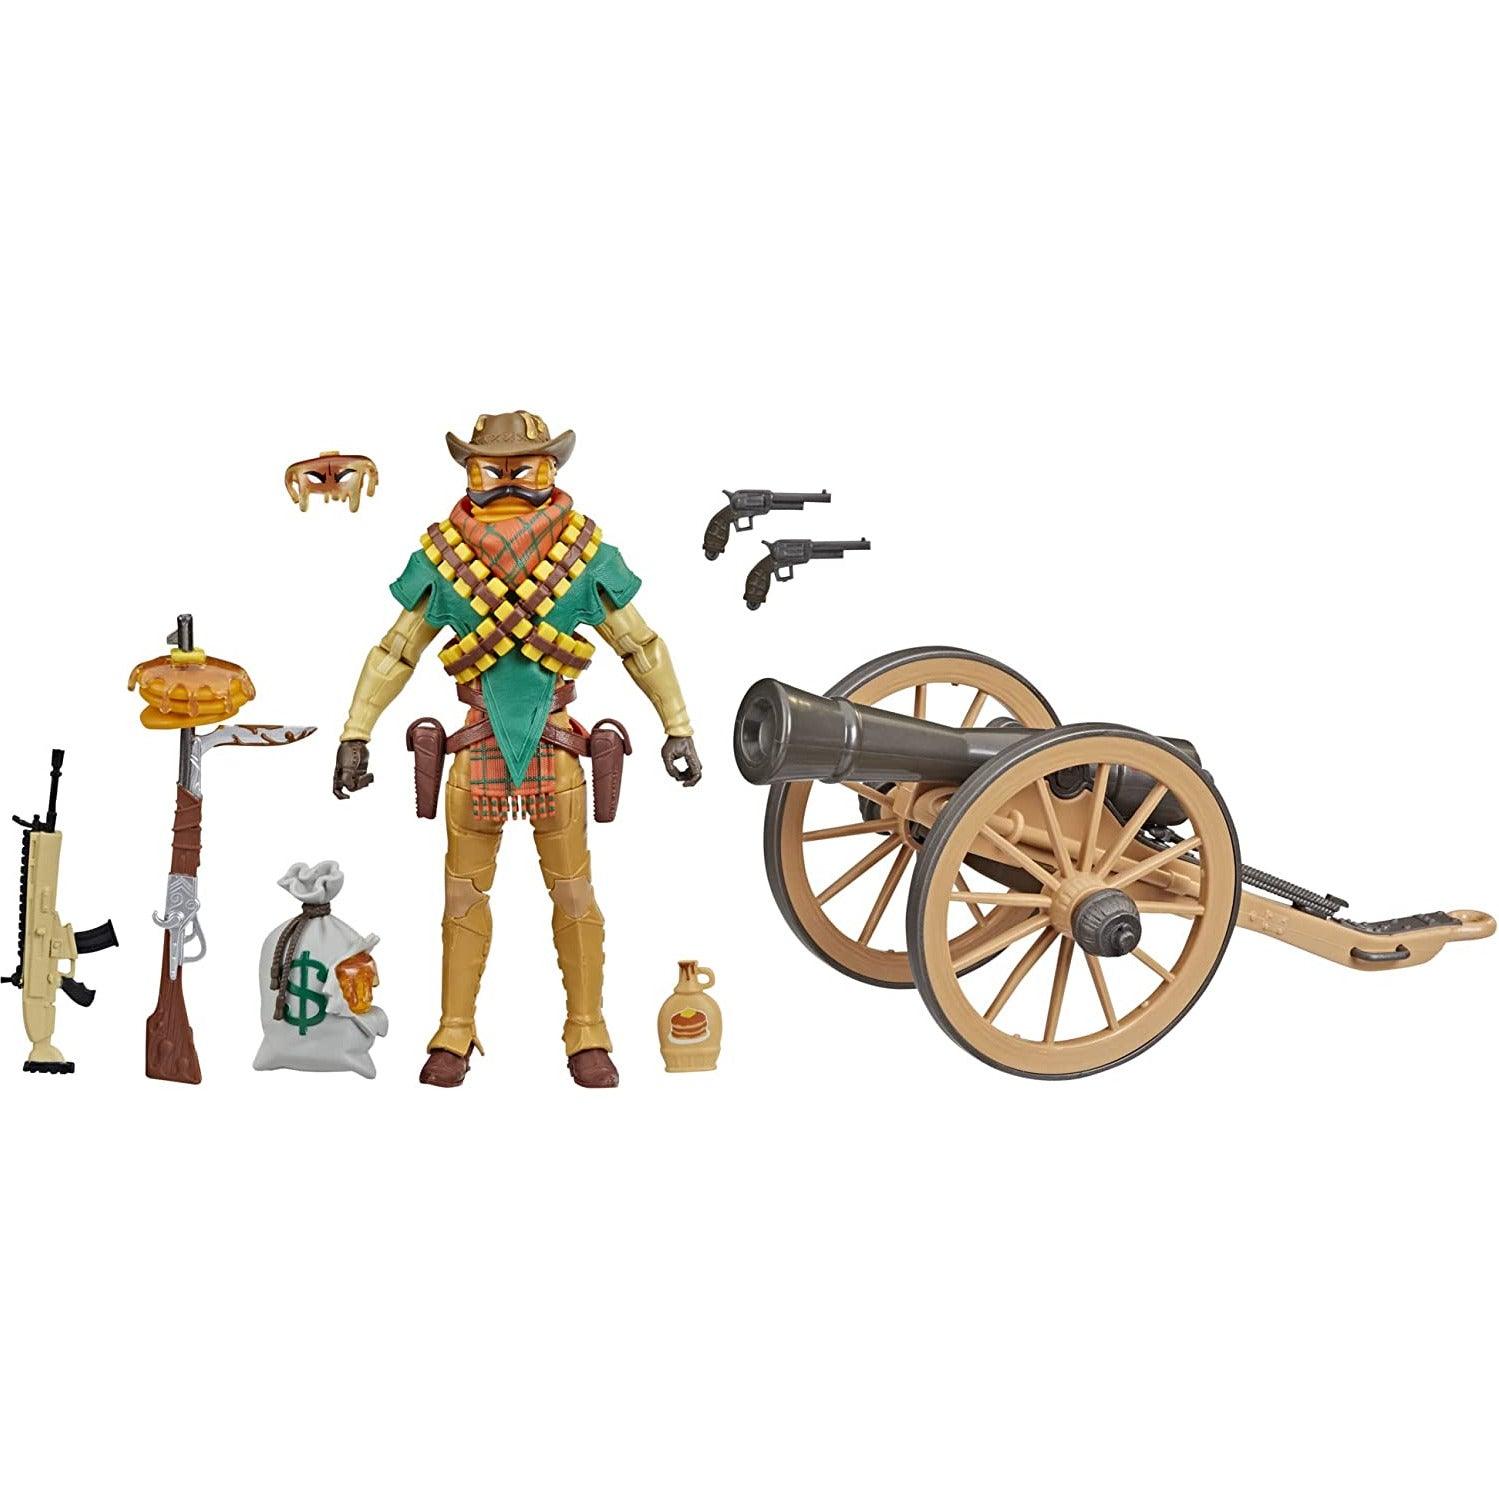 FORTNITE Hasbro Victory Royale Series Mancake Deluxe Pack Collectible Action Figure with Accessories - Ages 8 and Up, 6-inch - BumbleToys - 8+ Years, 8-13 Years, Action Battling, Action Figures, Boys, Figures, Fortnite, OXE, Pre-Order